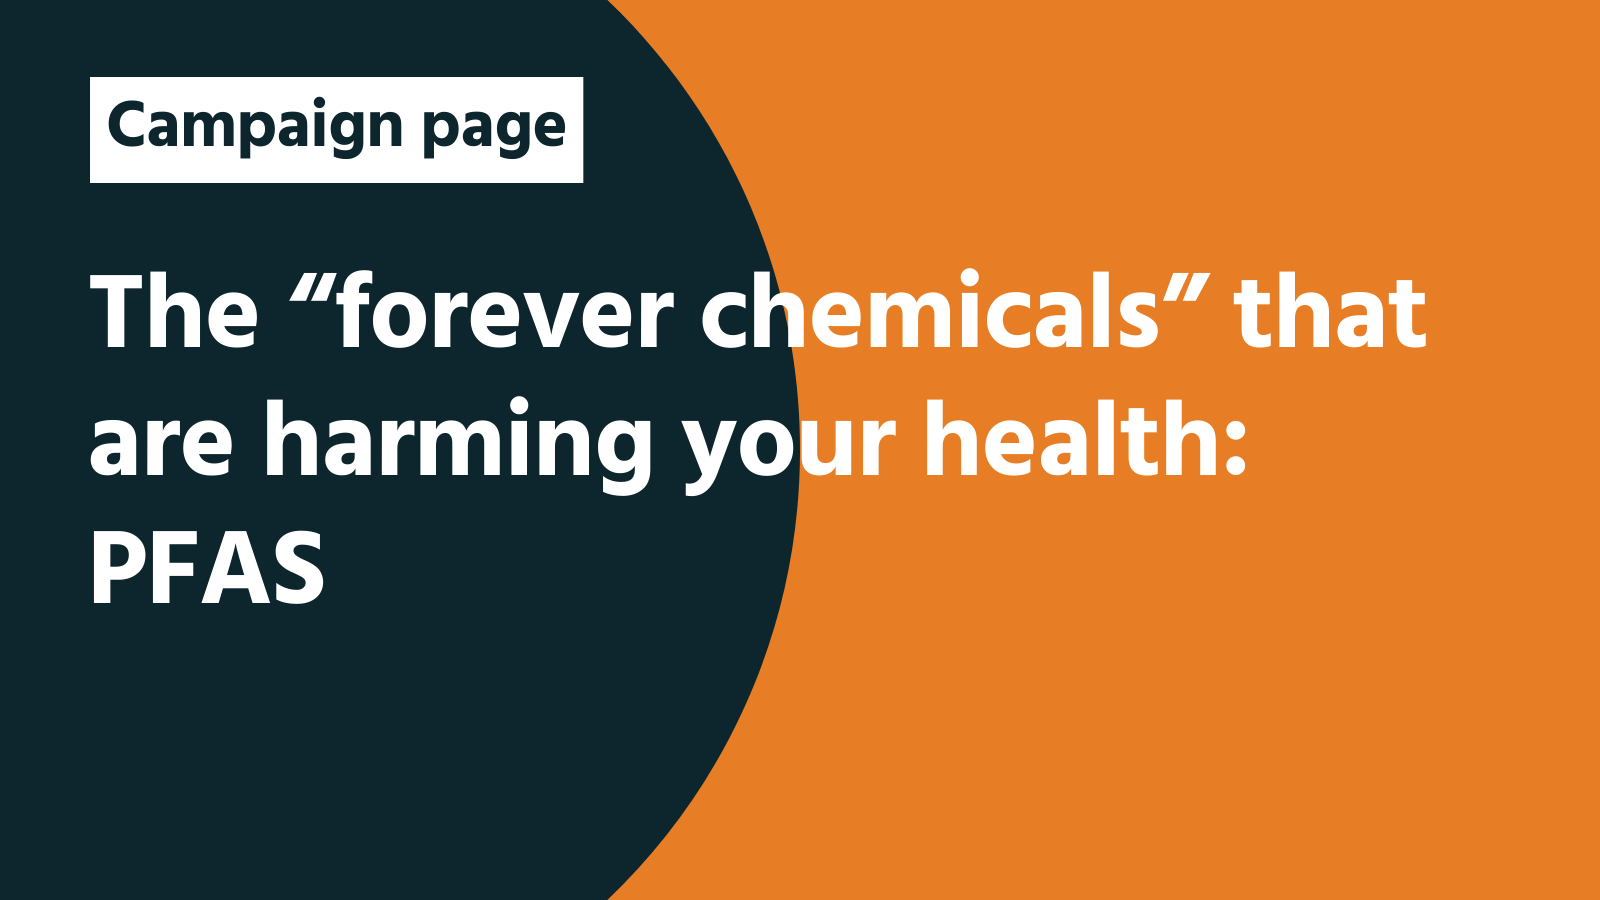 The “forever chemicals” that are harming your health: PFAS